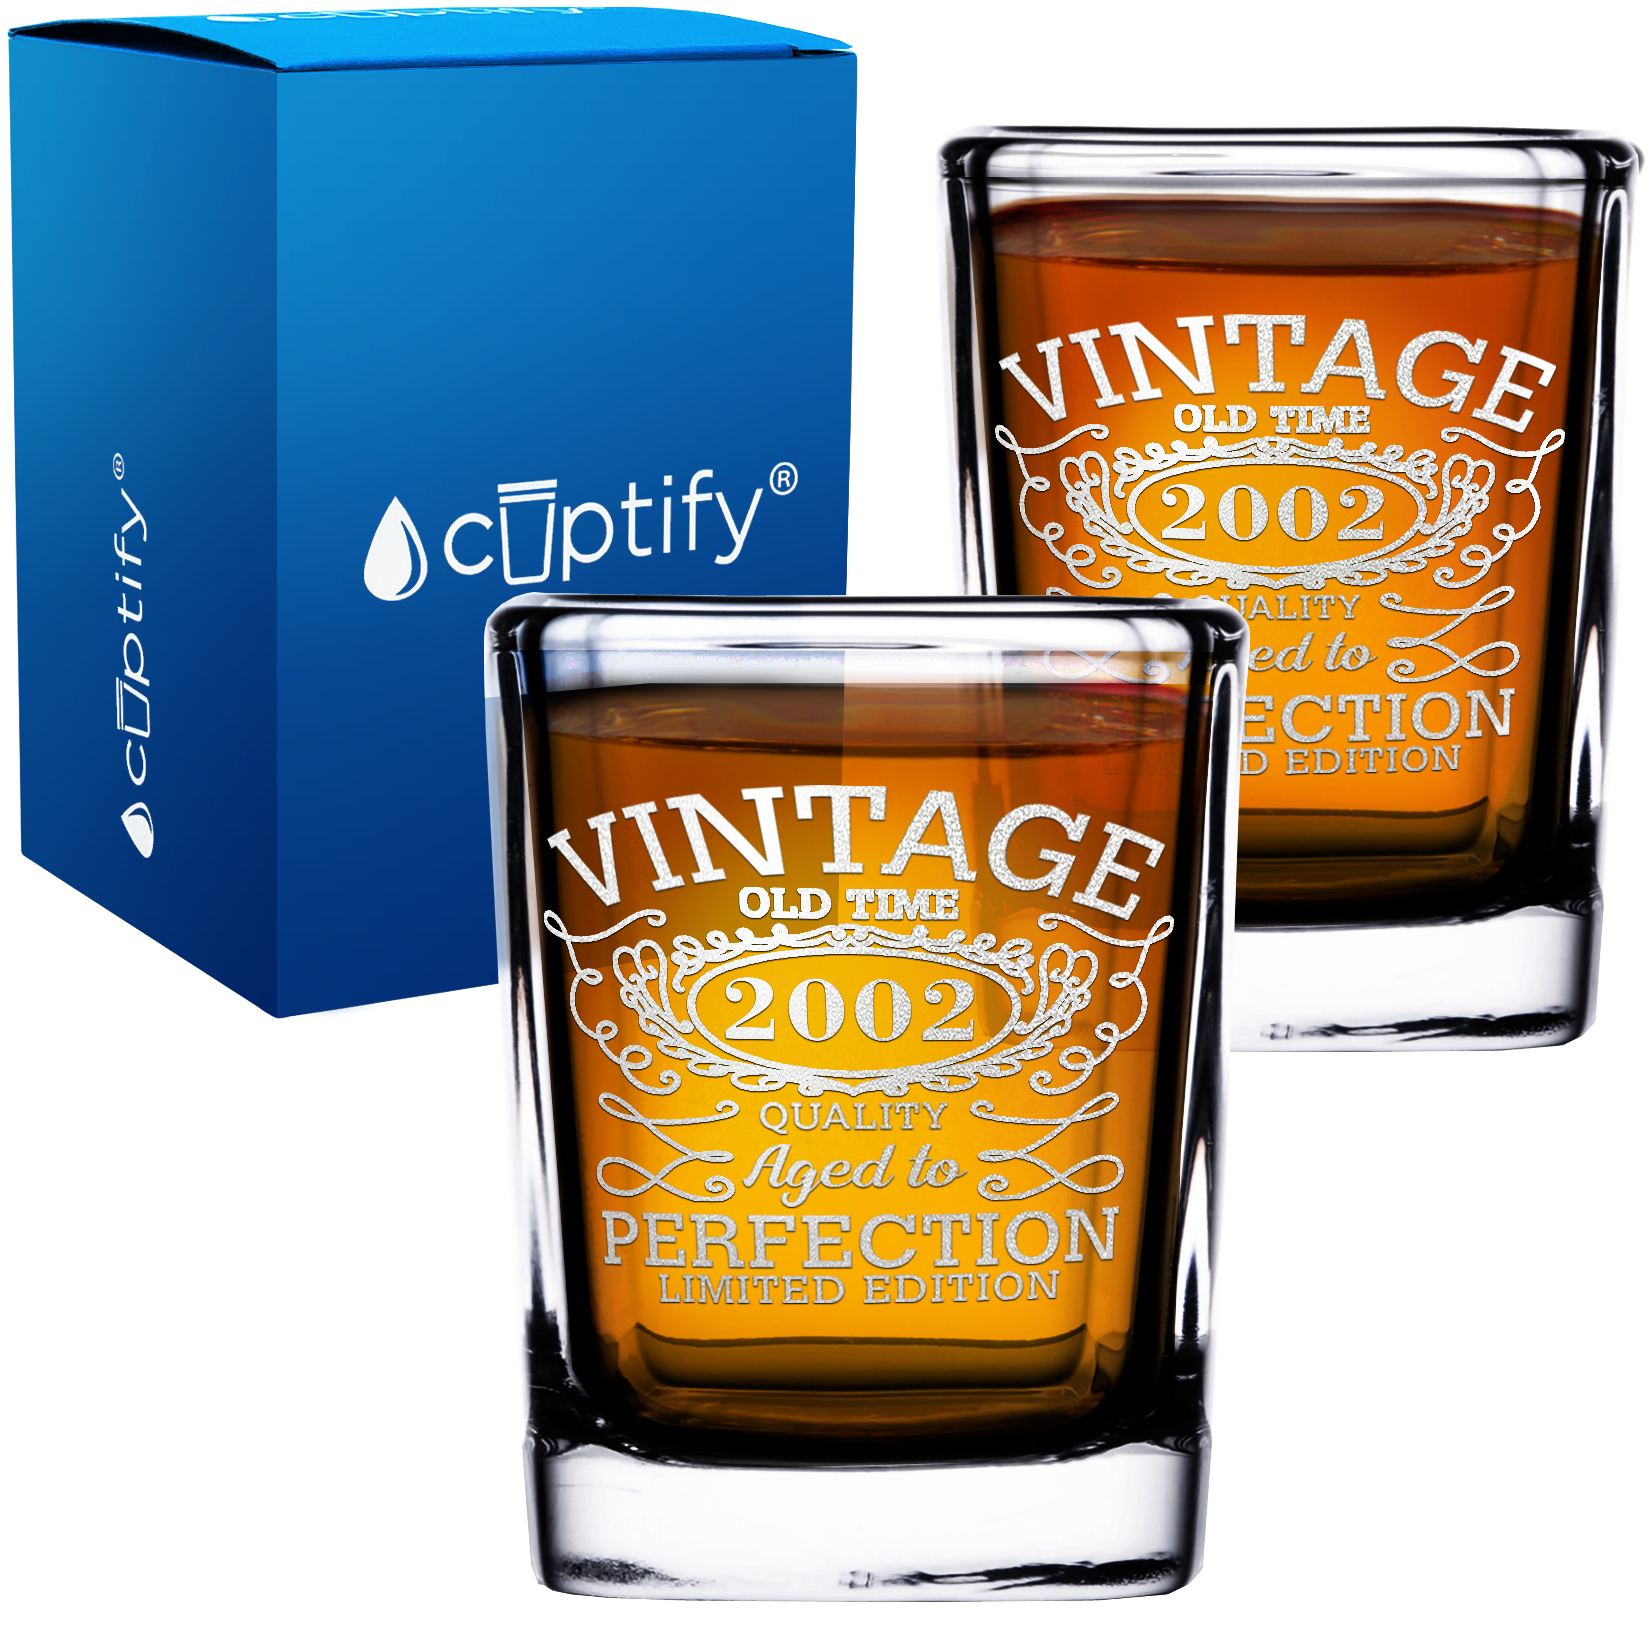 20th Birthday Vintage 20 Years Old Time 2002 Quality 2oz Square Shot Glasses - Set of 2